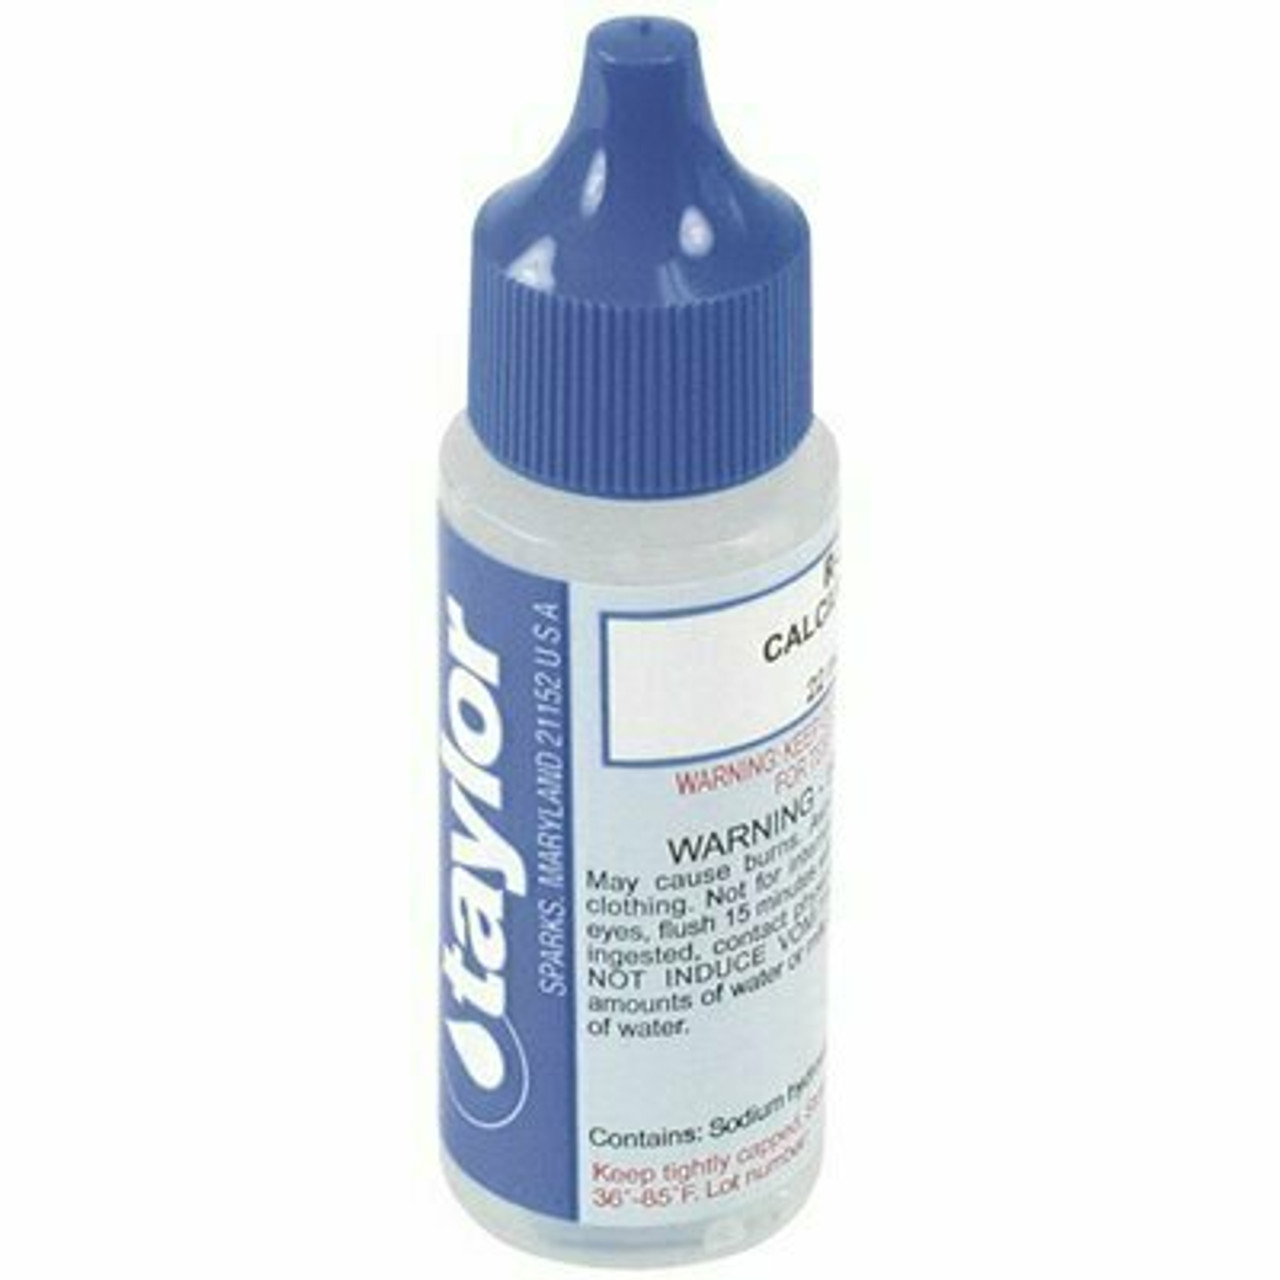 Taylor 3/4 Oz. Test Kit Replacement Reagent Refill Bottles Calcium Buffer Reagent